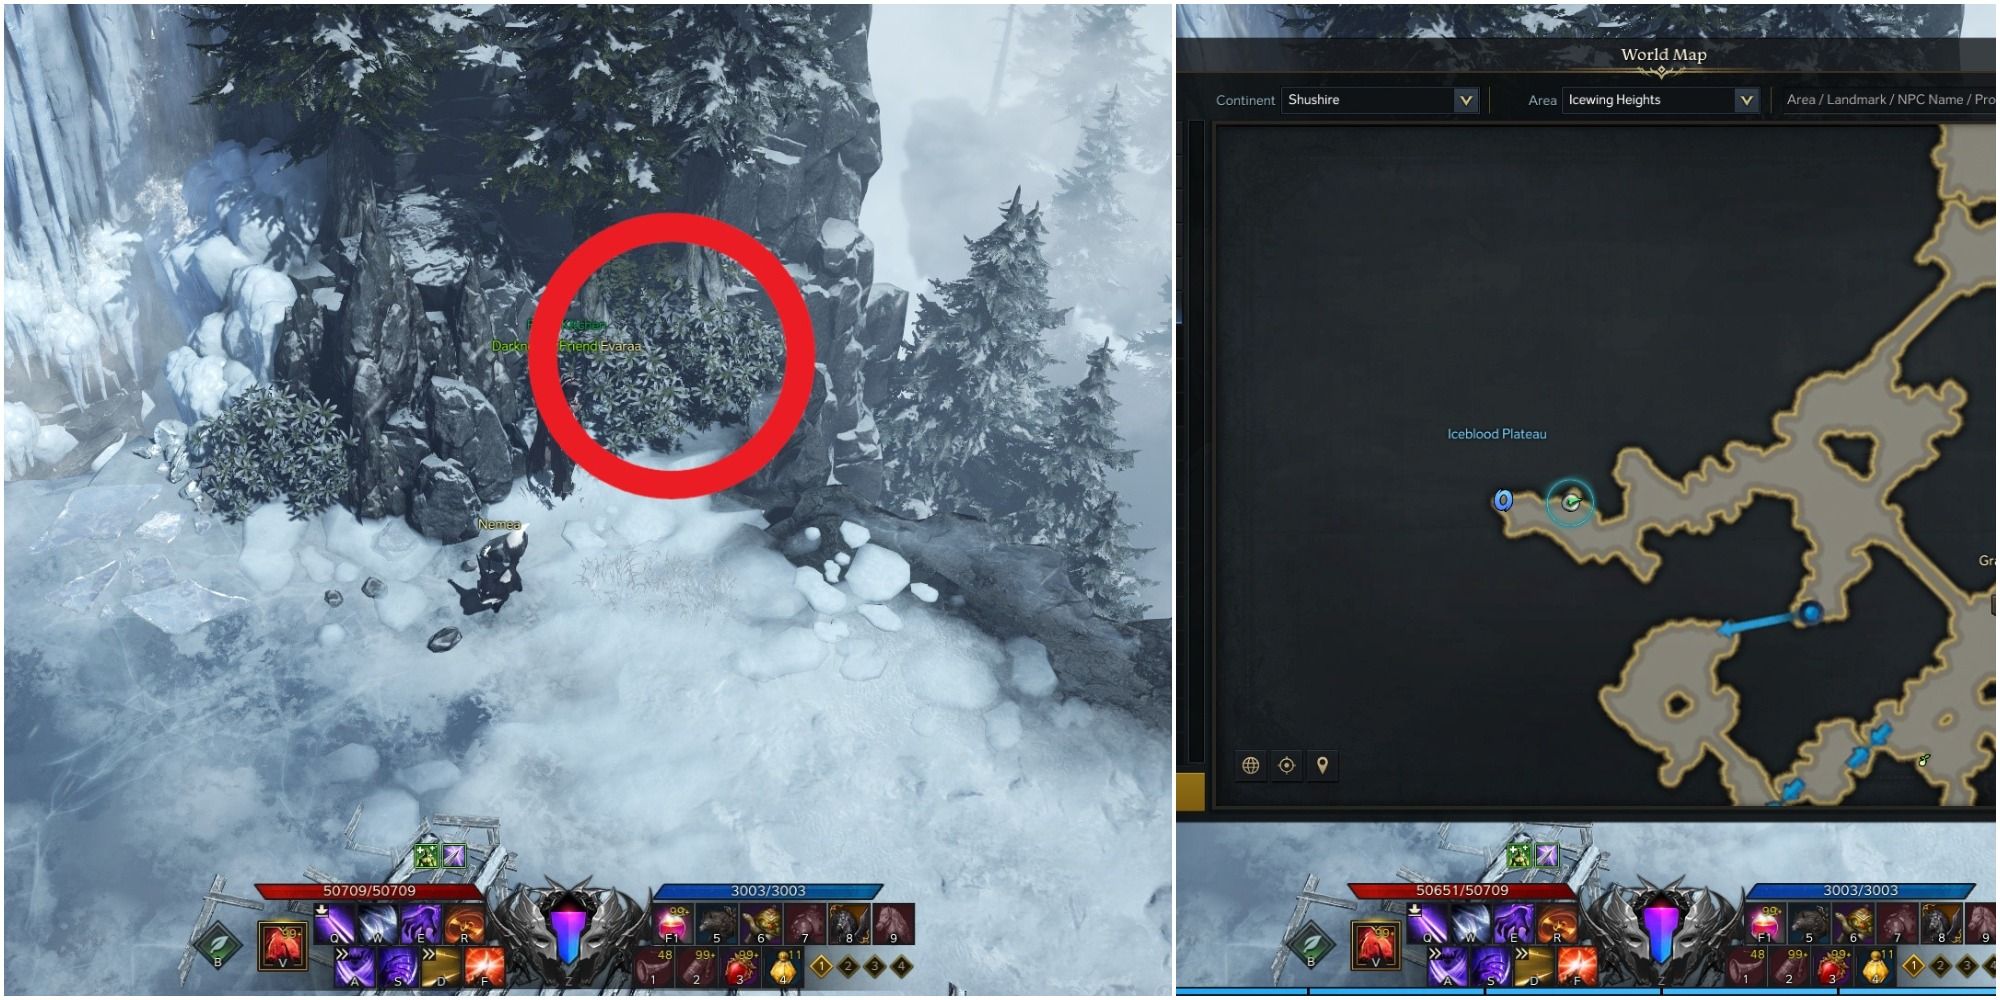 Lost Ark split image of Frozen Butterfly Larva location on the map and its location on the ground with a red circle around a bush